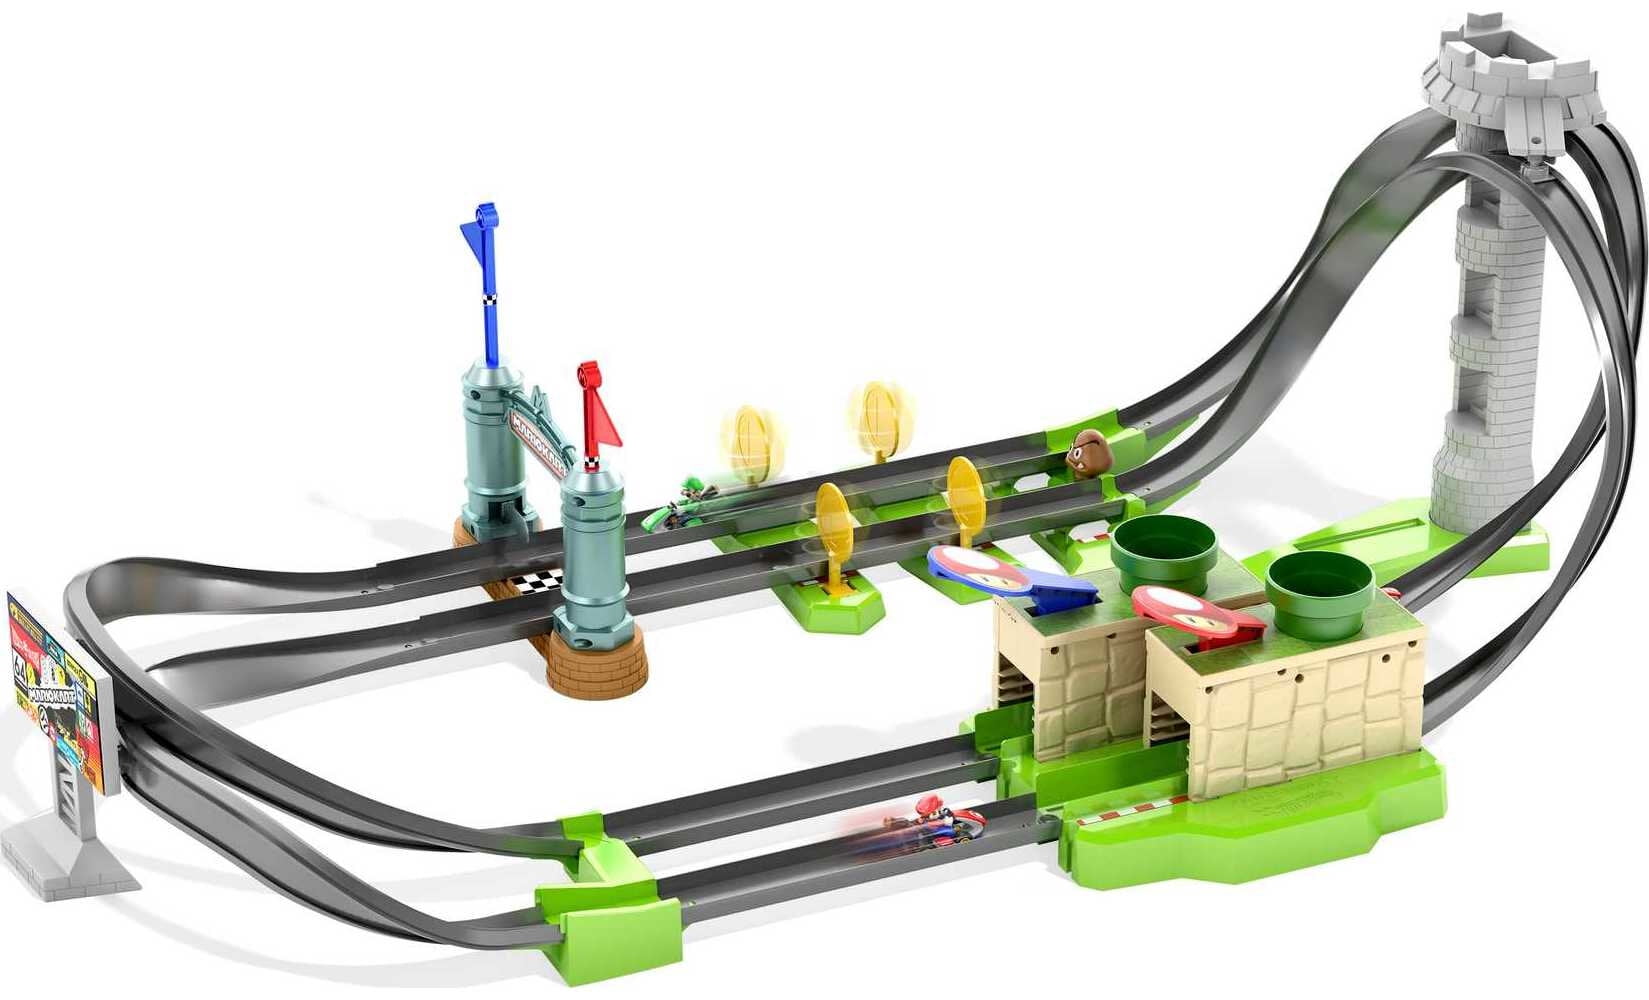 Hot Wheels Mario Kart Circuit Lite Track Set with 1:64 Scale Toy